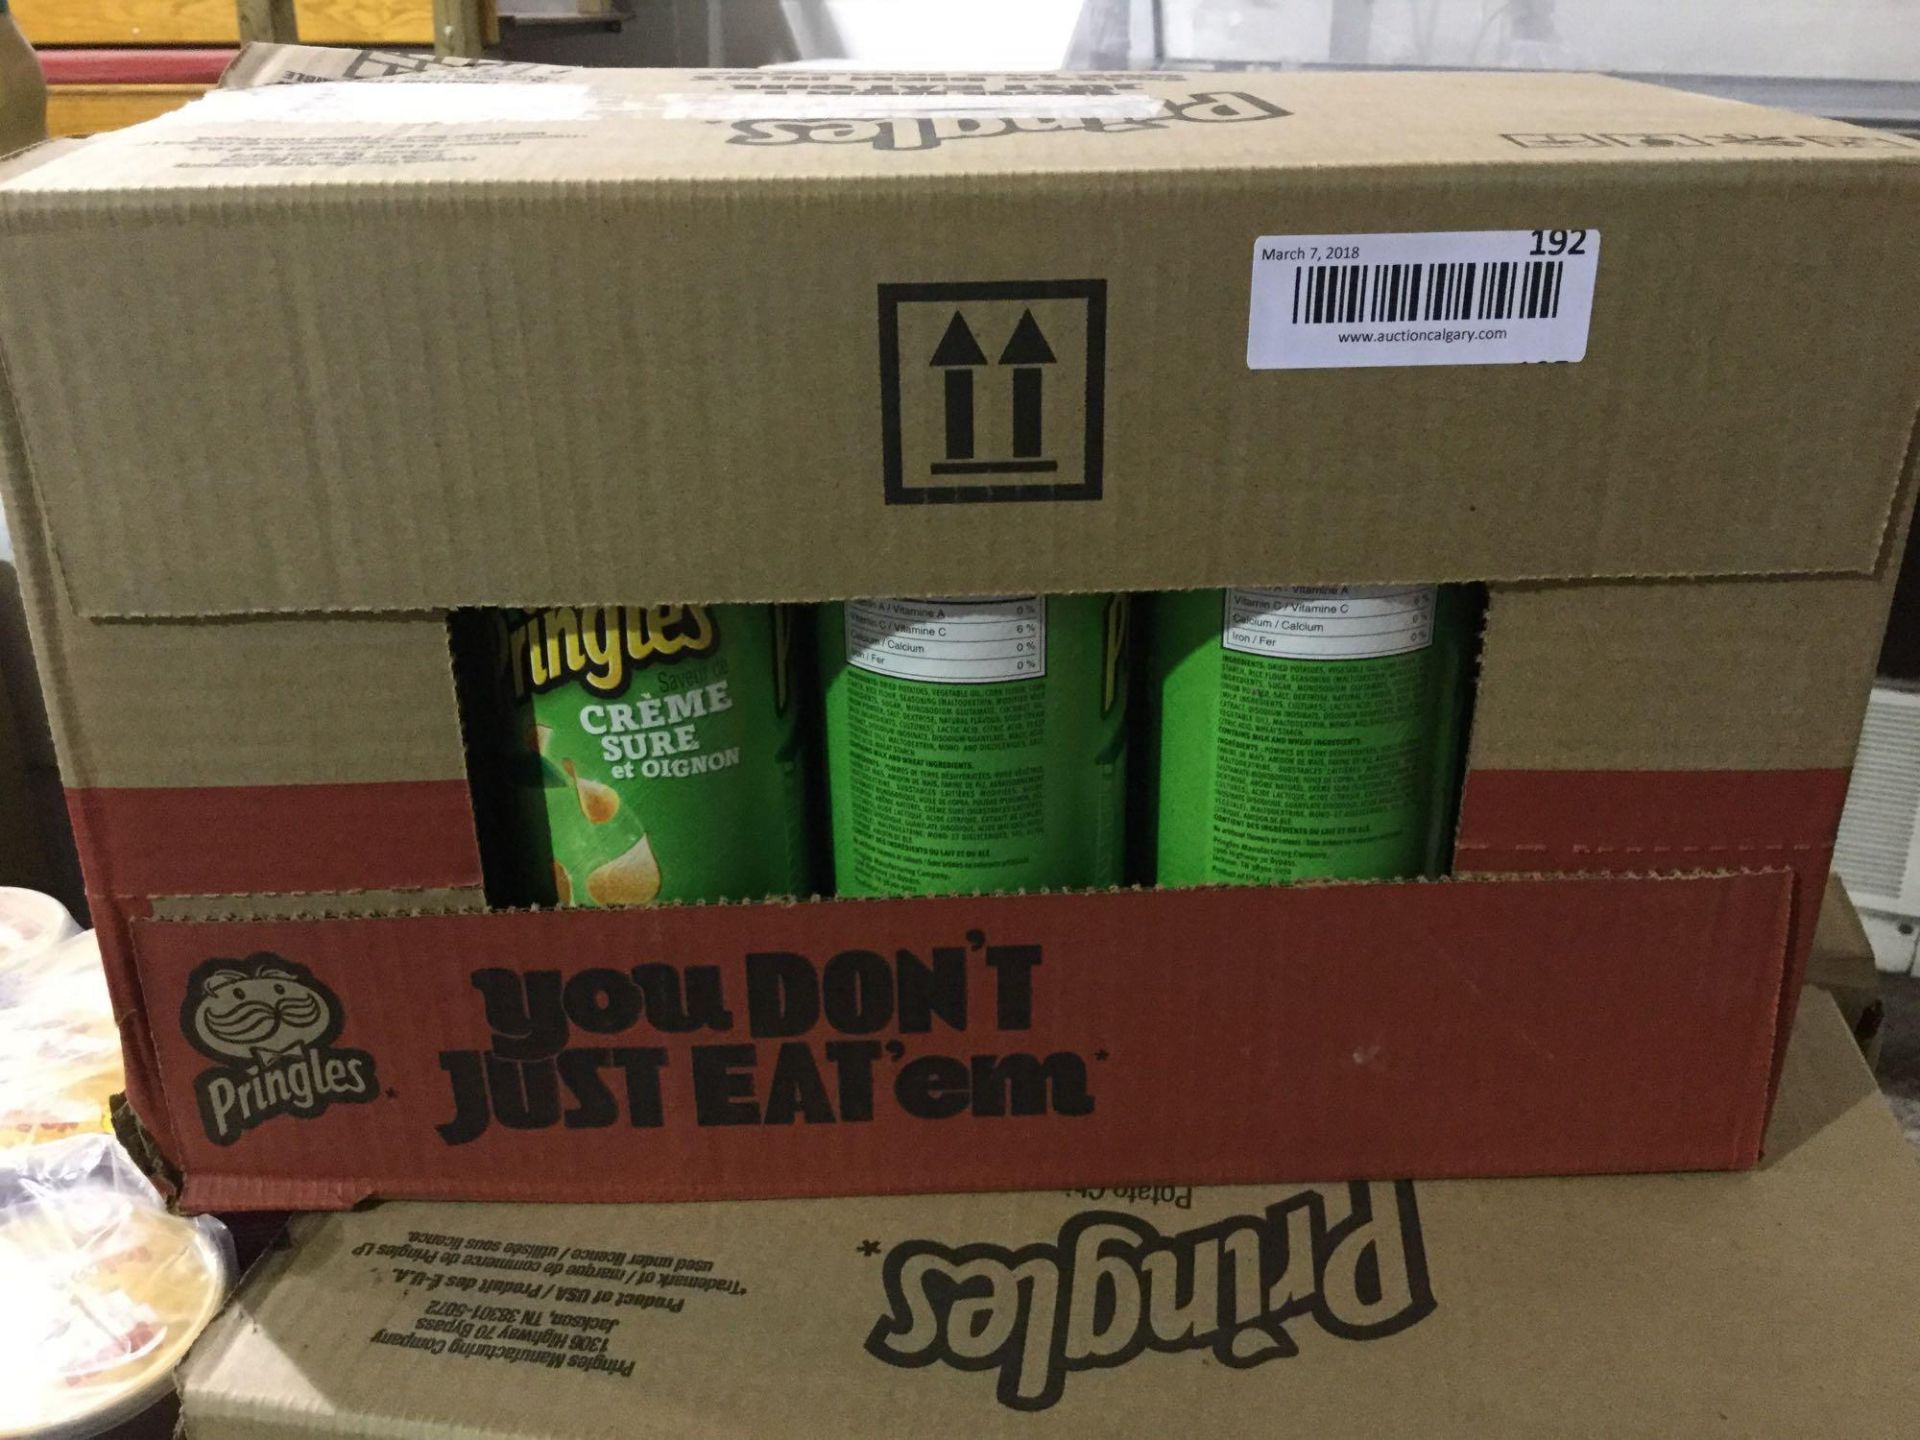 Case of 14 x 156 g Cans Pringles- Sour Cream and Onion Chips